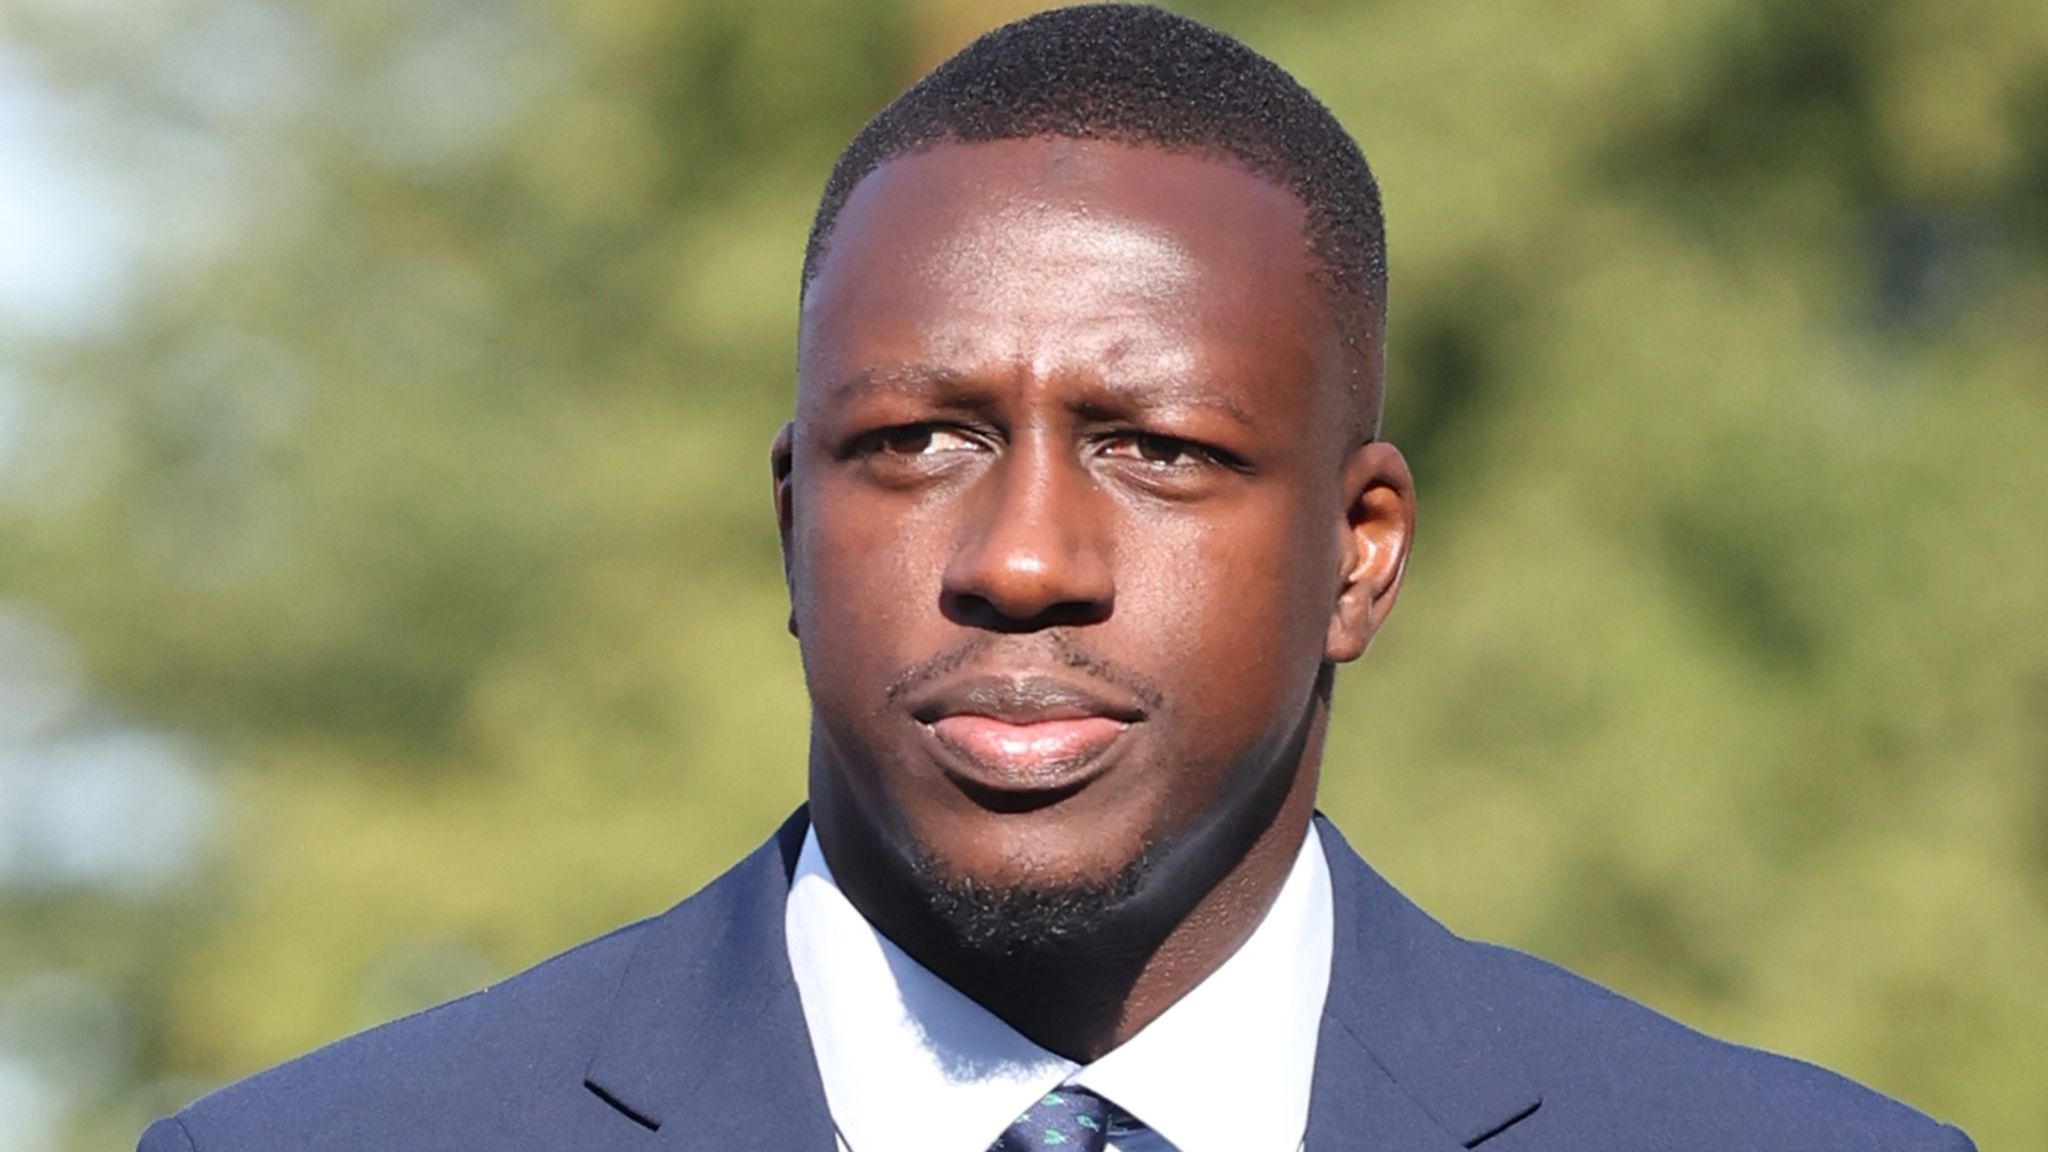 Mendy faces fresh trial over sexual assault